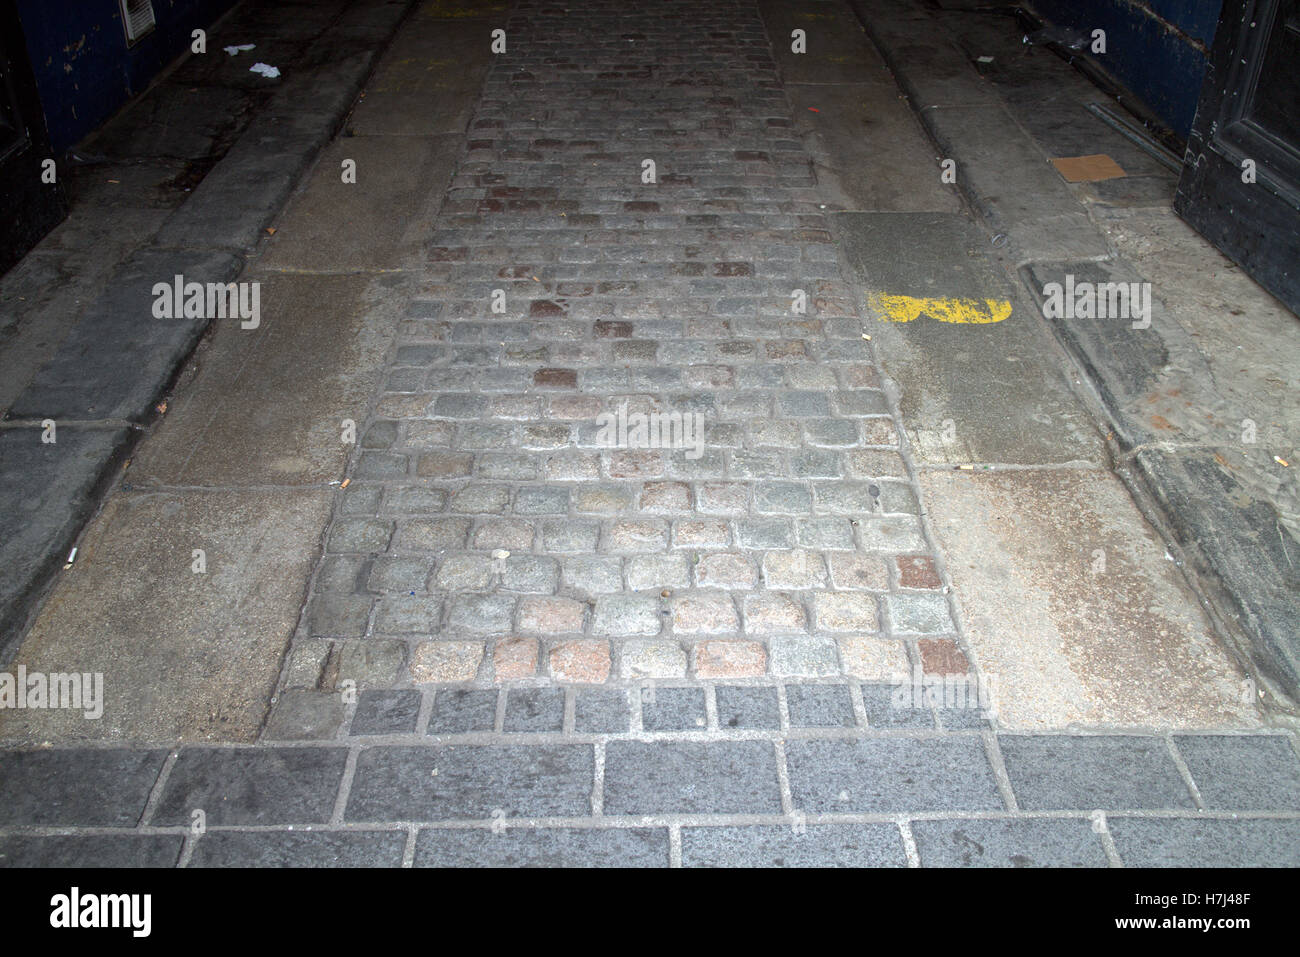 Tram lines and cobbles street pavement Stock Photo